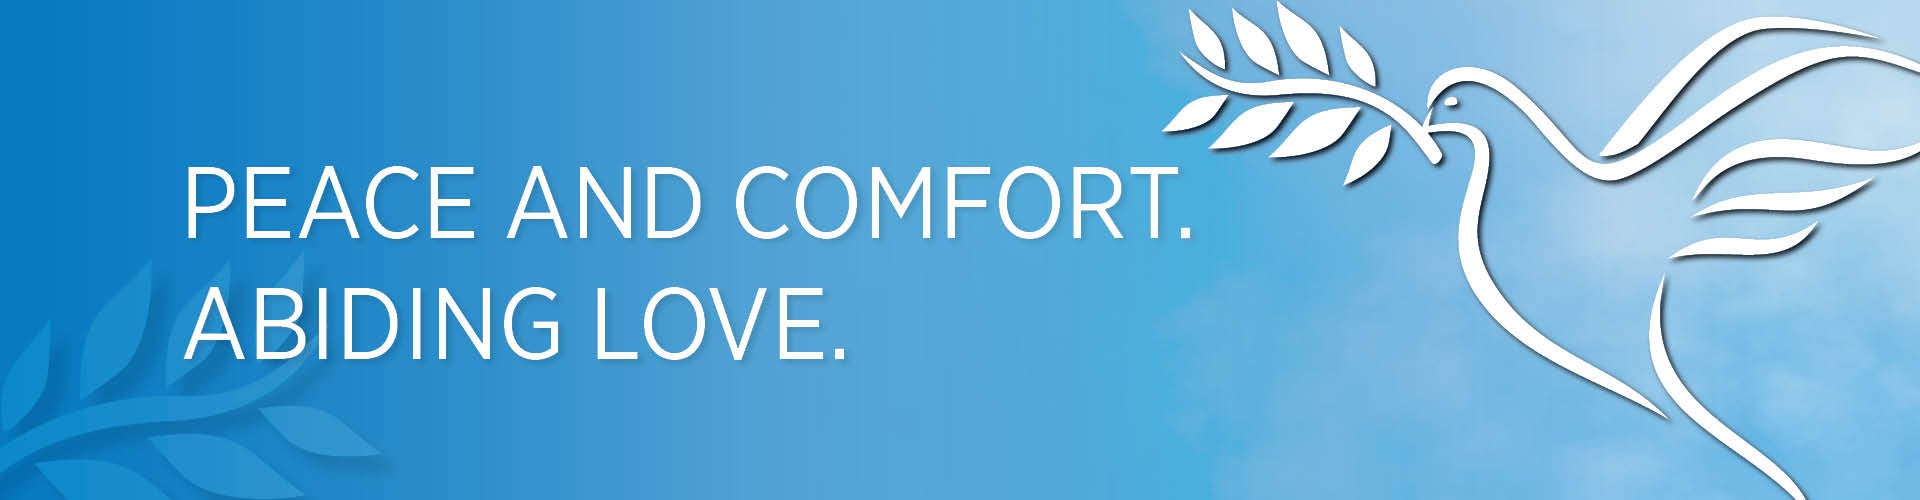 Light blue background with white outlined dove and text that reads peace and comfort abiding love.